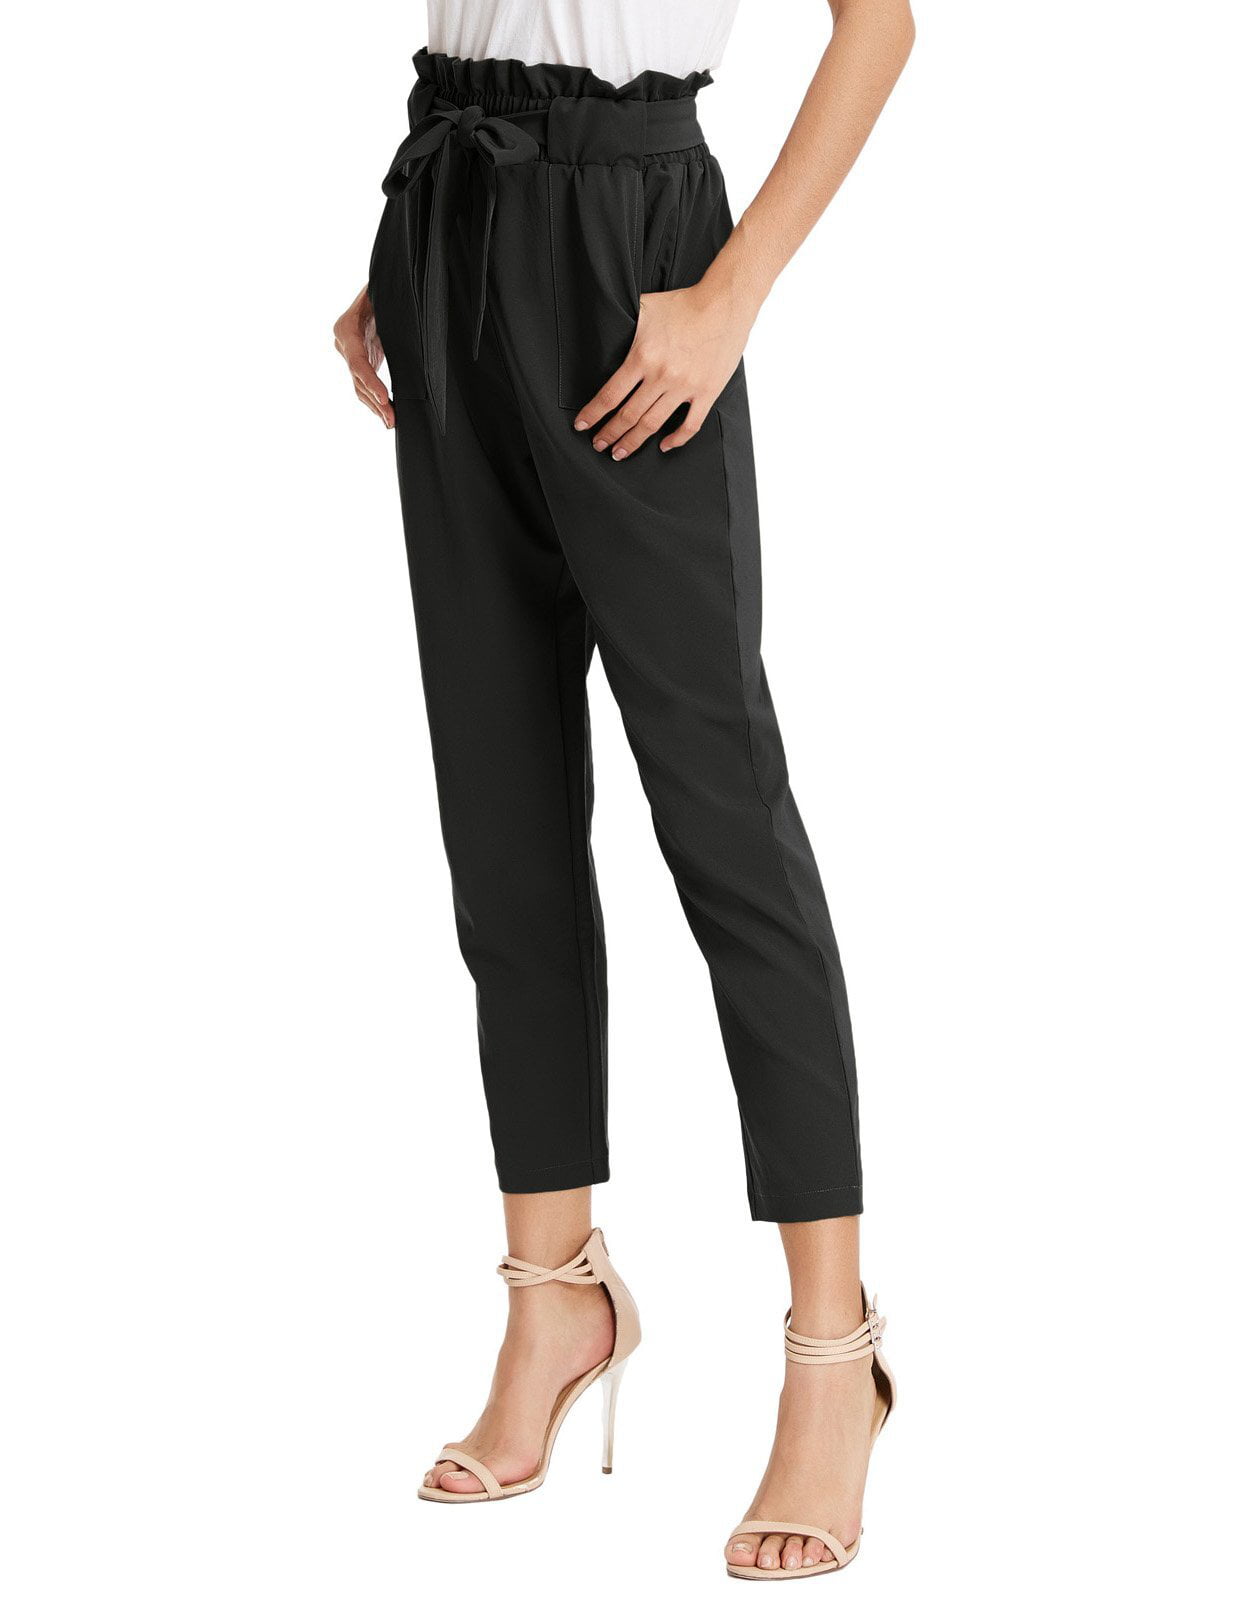 GRACE KARIN Womens Lightweight Casual Pants with Pockets Front Pinktuck Seam Pant Trouser 